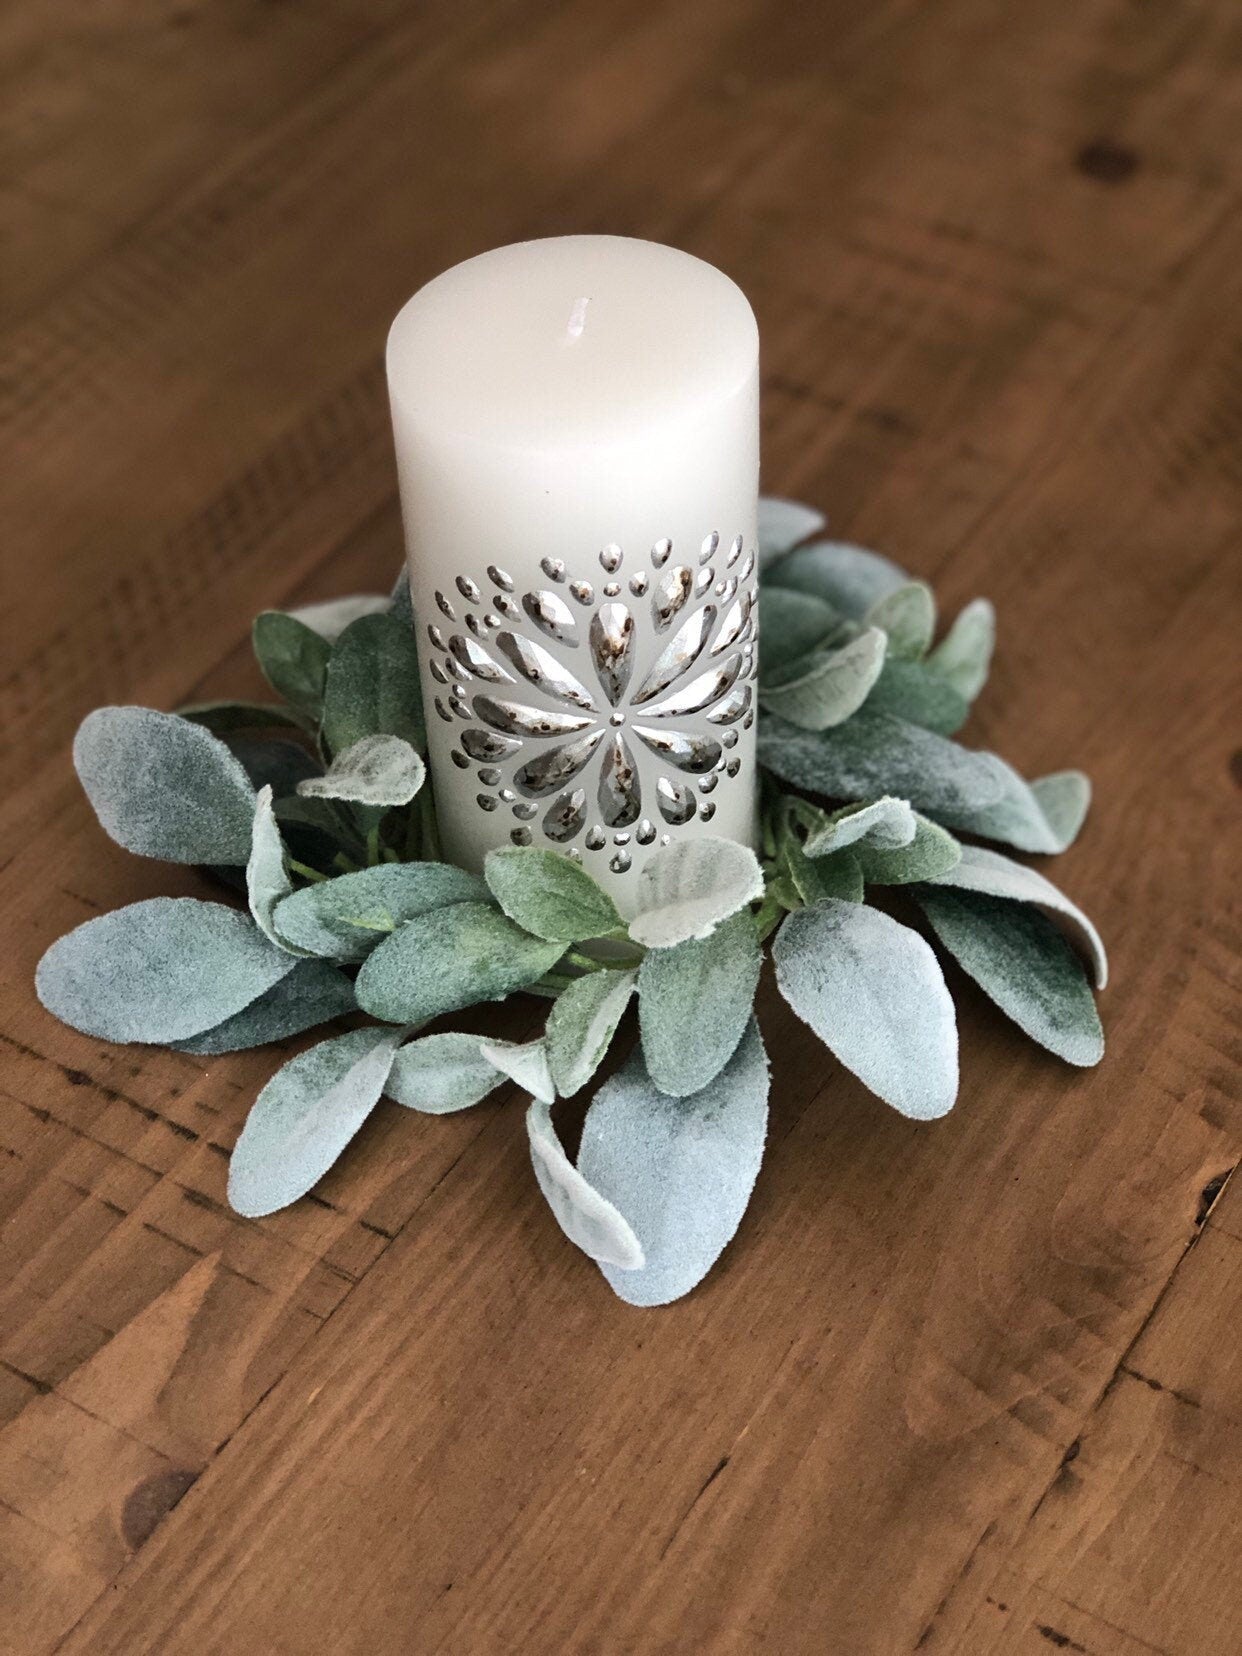 SALE/Lambs Ear Greenery Candle Ring Mini Wreath Wreath for Spring, Year Round Rustic Farmhouse Home Decor, Wedding centerpiece